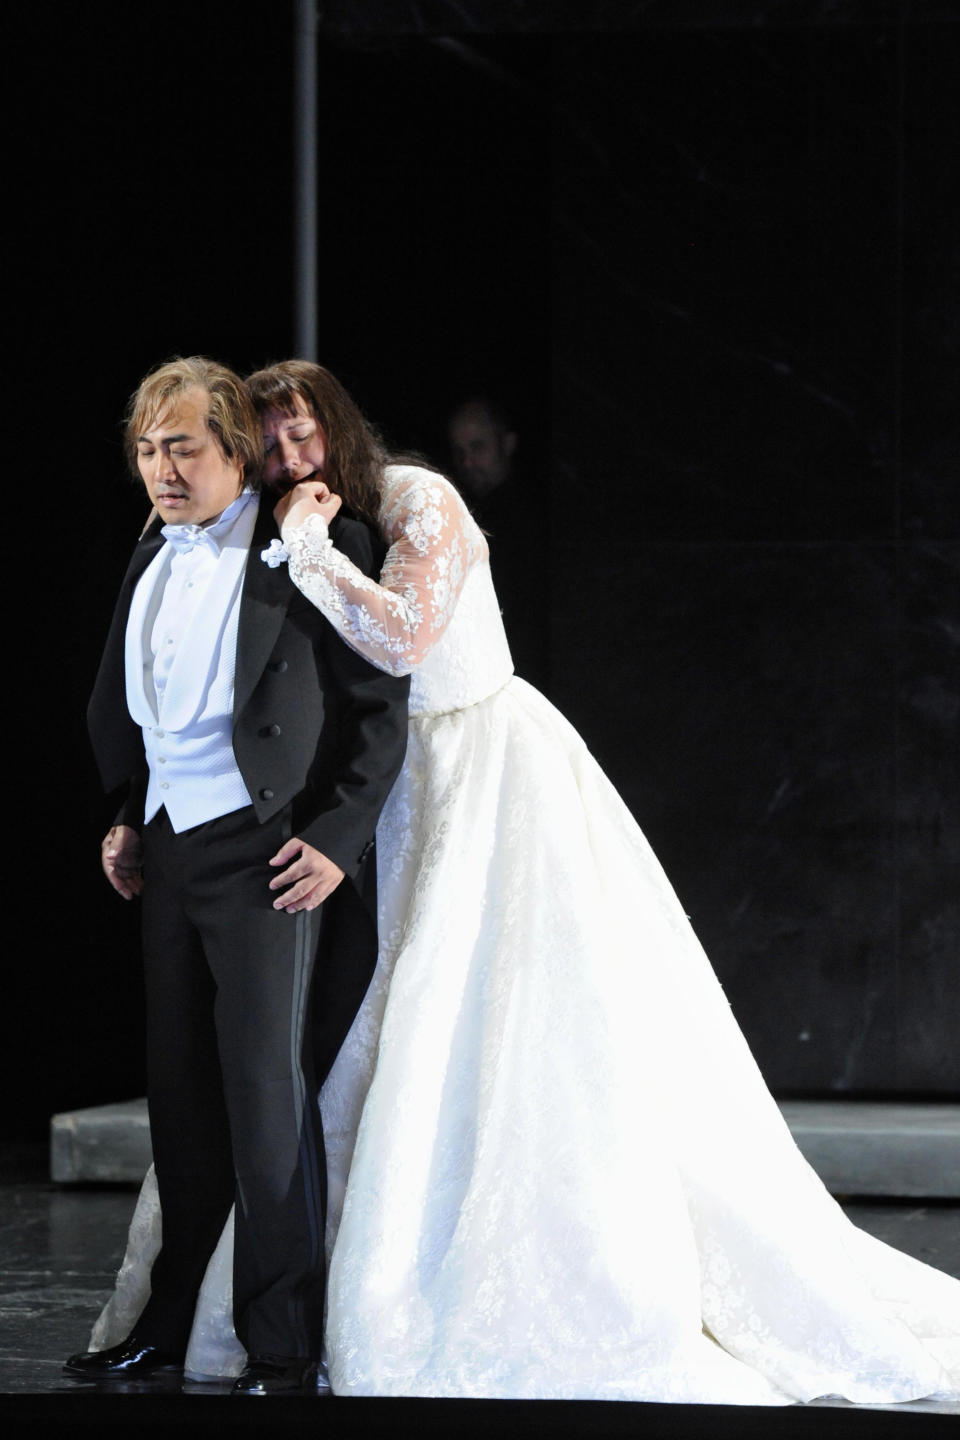 In this June 10, 2013 picture provided by the Frankfurt Opera House, Elza van den Heever , as Duchess Helene, right, and Alfred Kim as Henri, a young Sicilian, perform in Frankfurt, Germany, during a dress rehearsal for the rarely heard original French version of the Opera 'Les vepres Siciliennes' (The Sicilian vespers) by Giuseppe Verdi which had its premiere on June 16 at the Frankfurt Opera. (AP Photo/Thilo Beu,Frankfurter Oper)